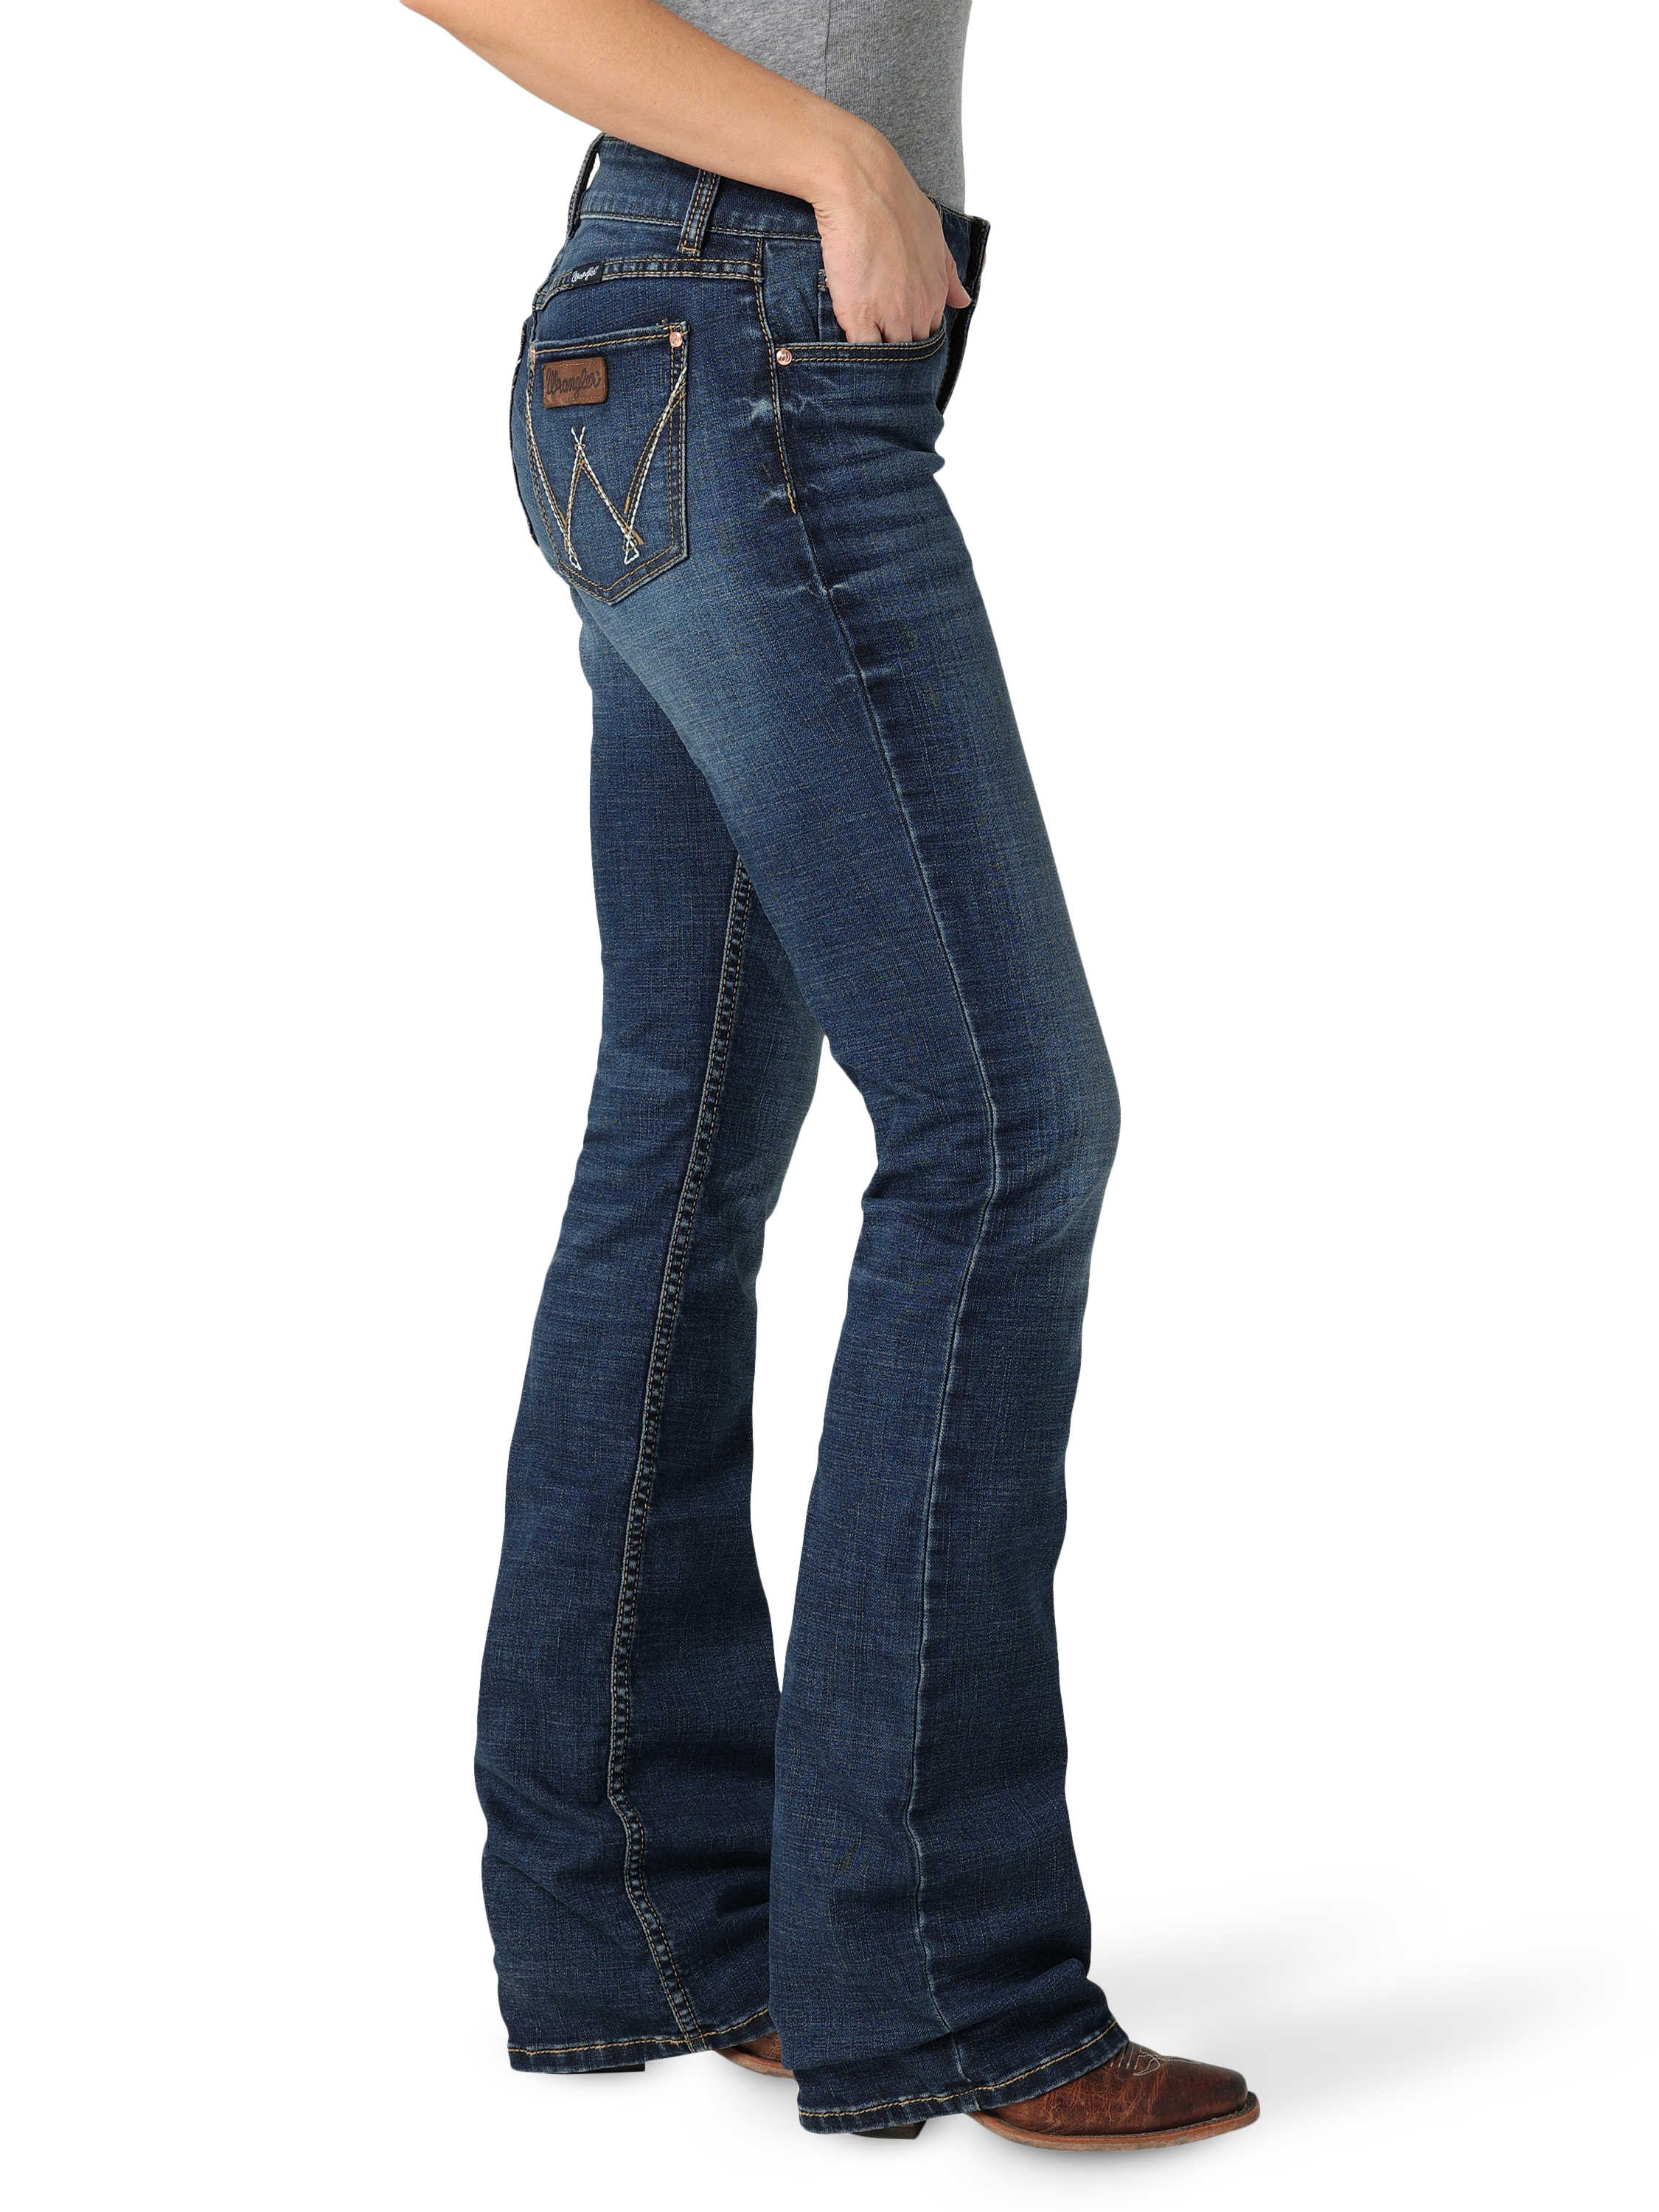 Wrangler® Women's Retro Mae Bootcut Jean with Stretch Fabric - image 3 of 6